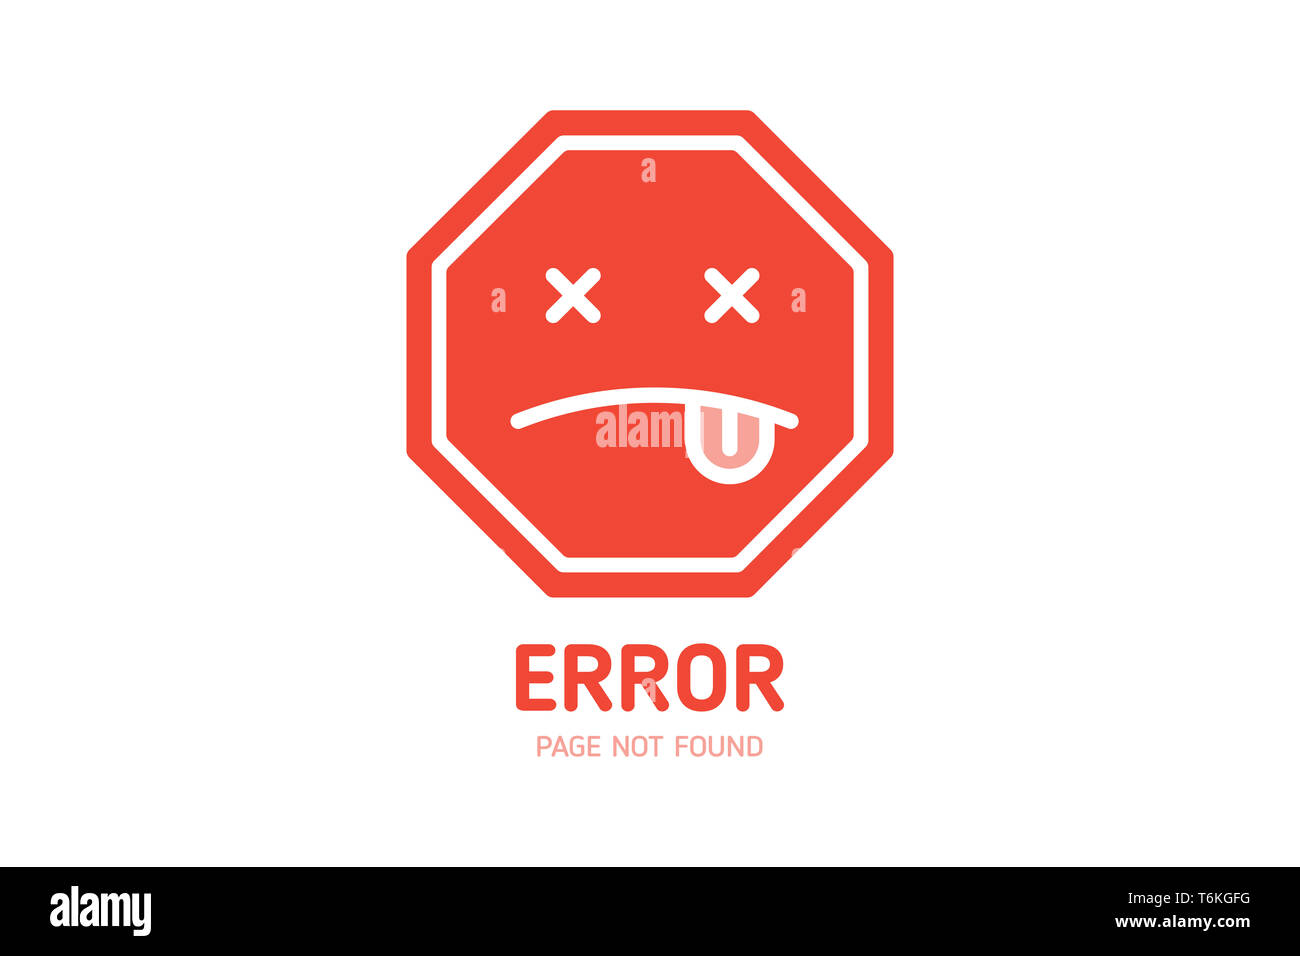 404  error page not found design template for website Stock Photo